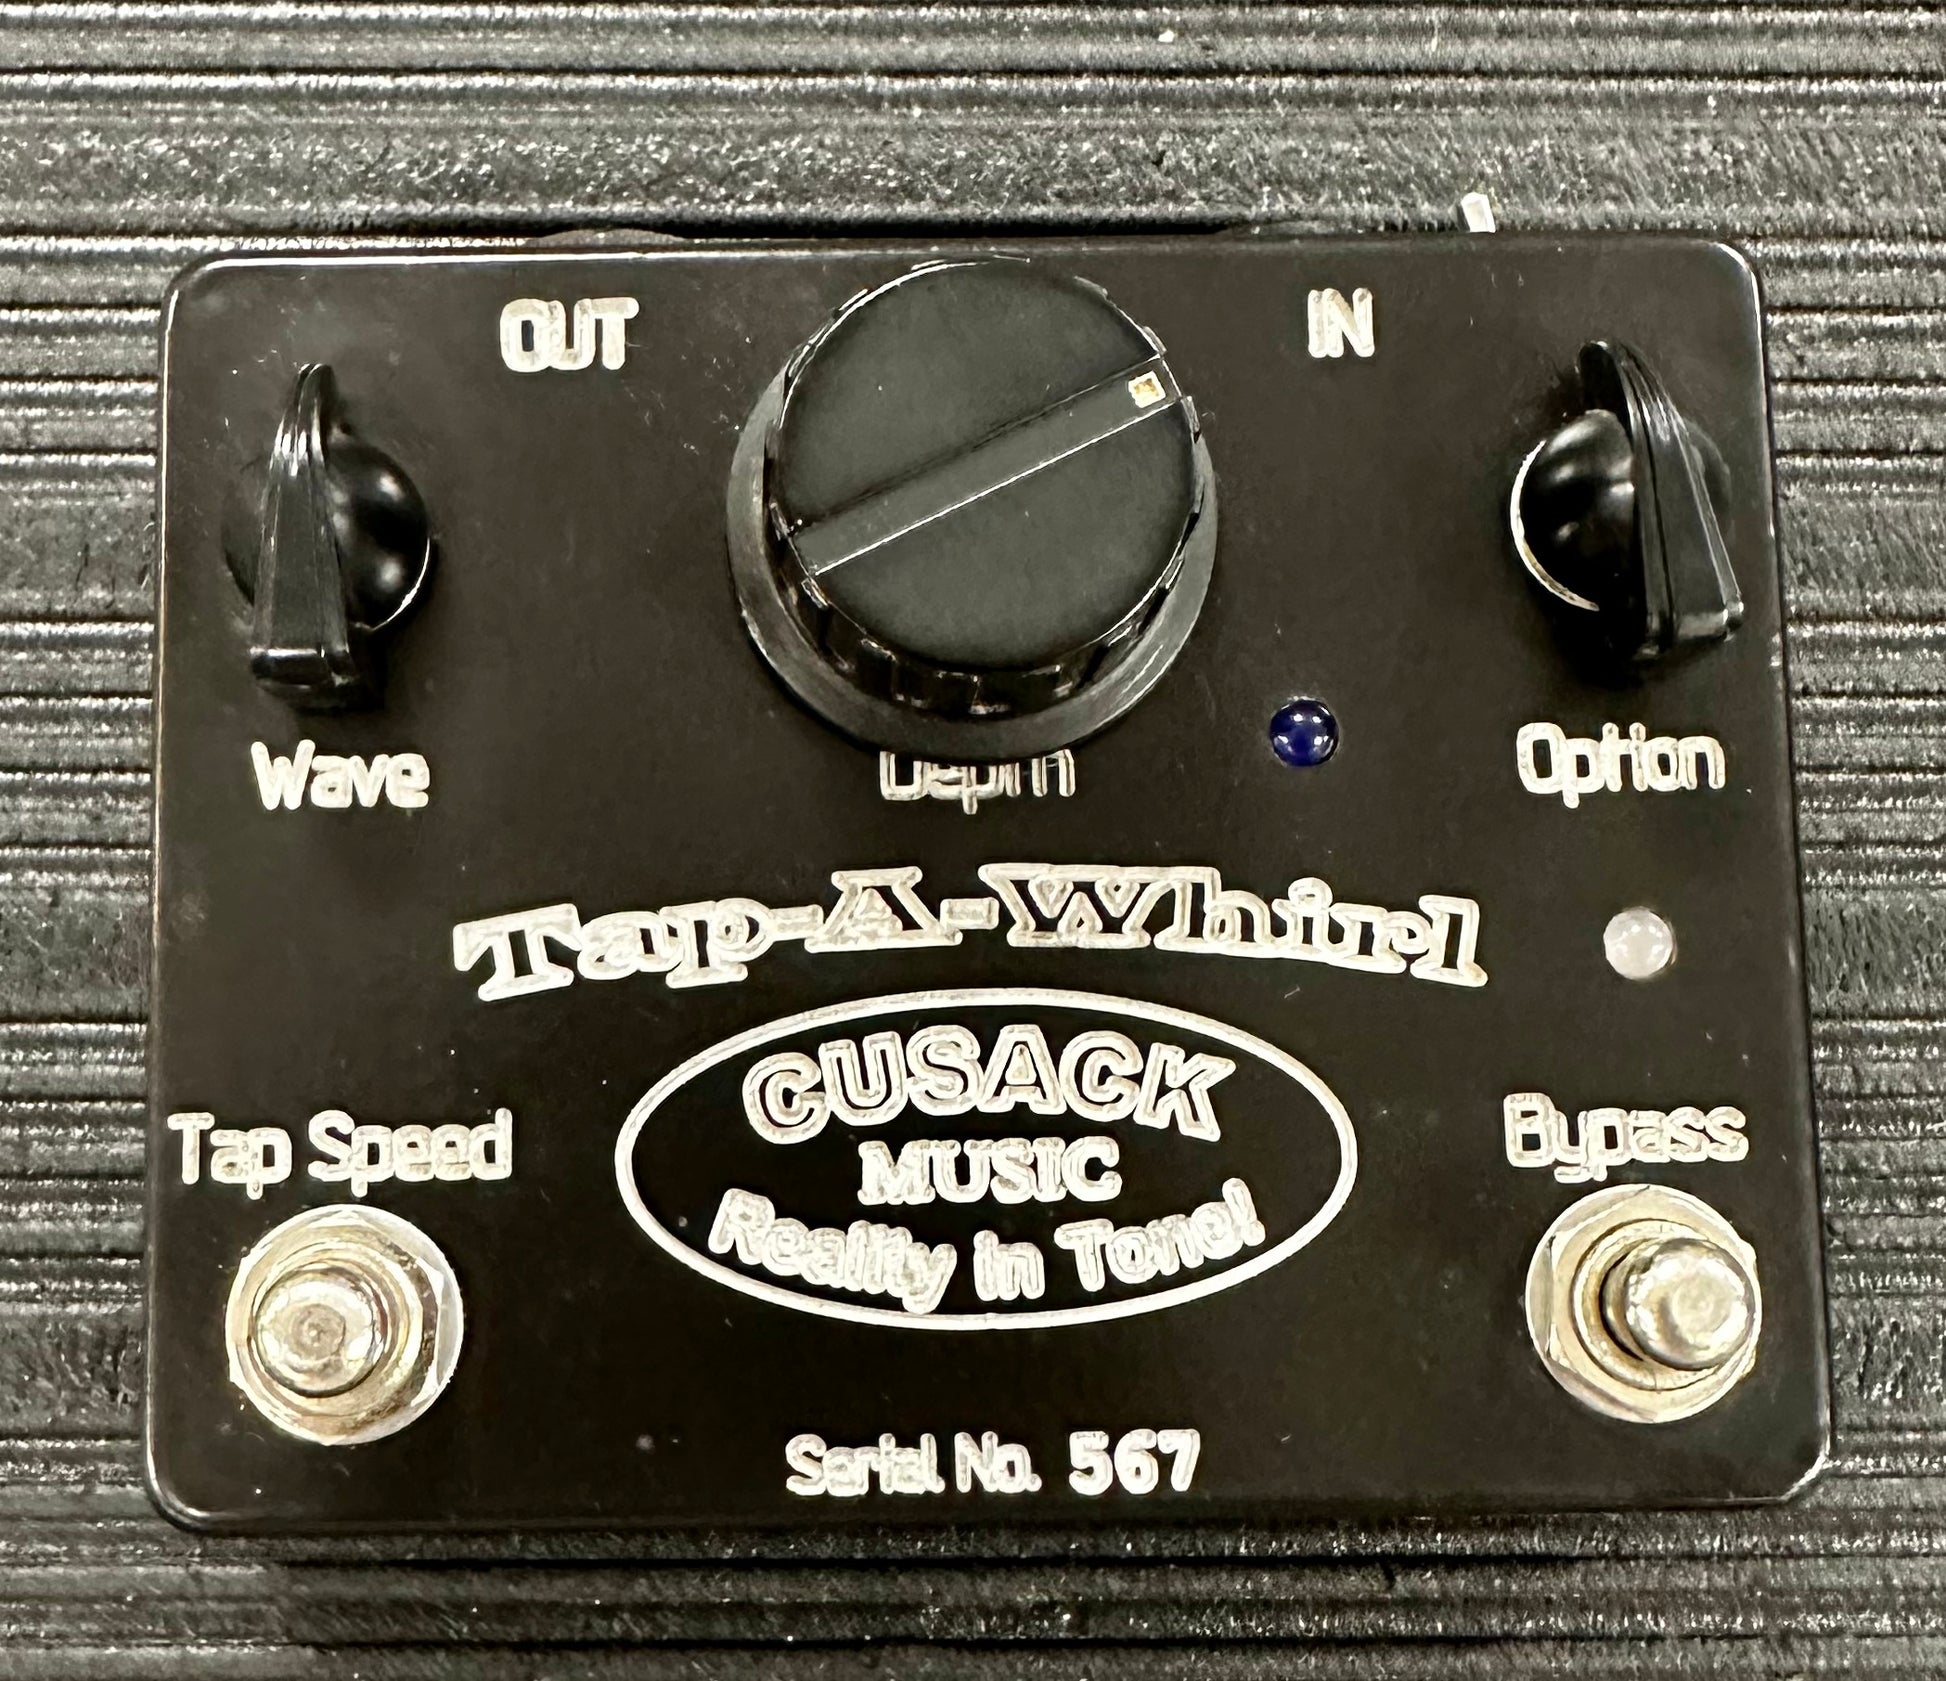 Top down of Used Cusack Music Tap-A-Whirl Temolo Pedal TSS2630.